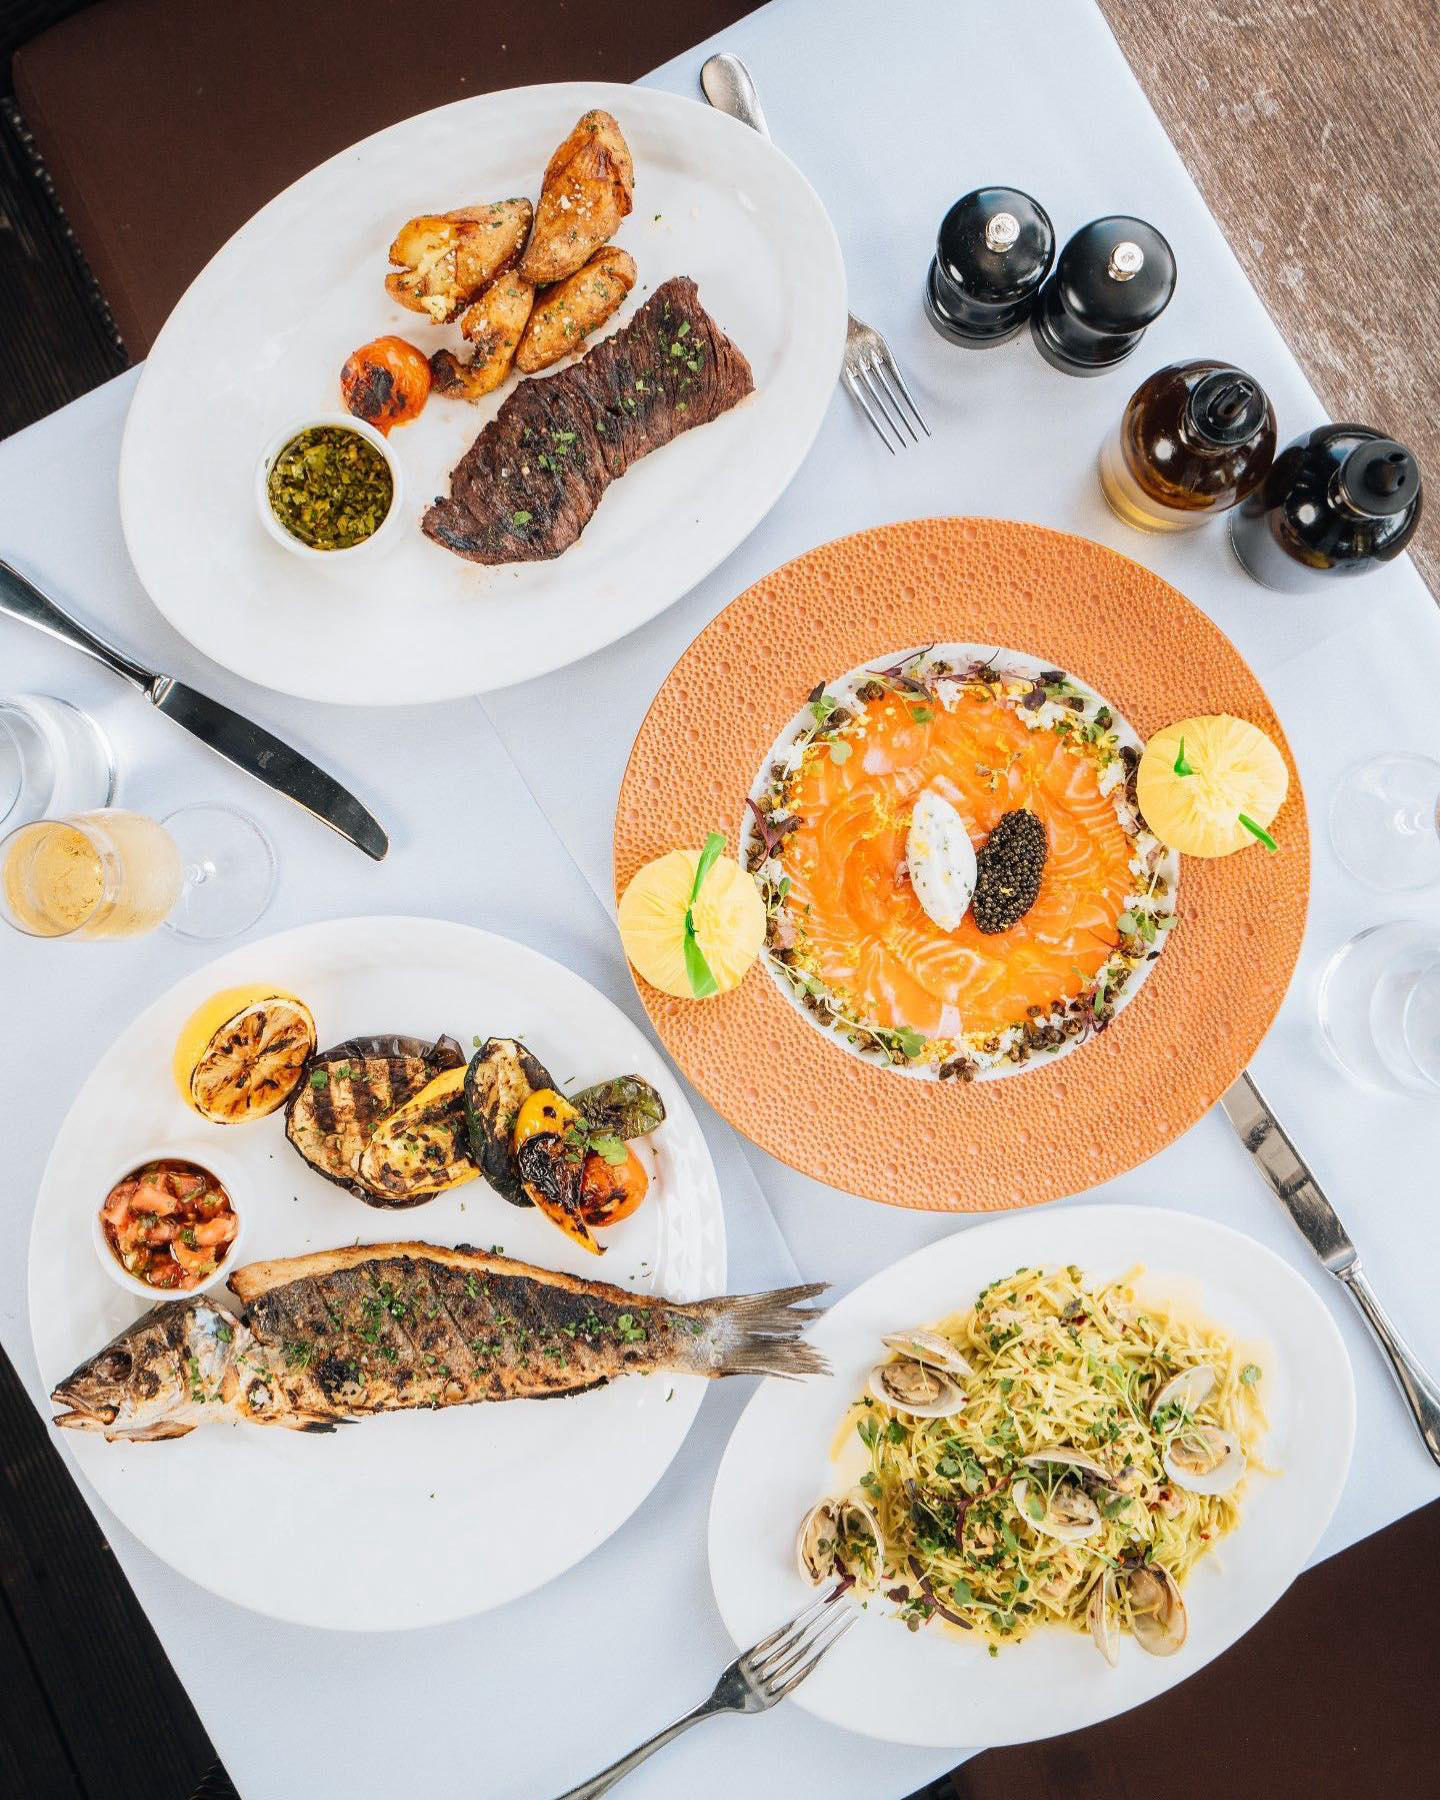 The Setai, Miami Beach - Dig into flavors of southern Europe, classic American dishes, and specialty